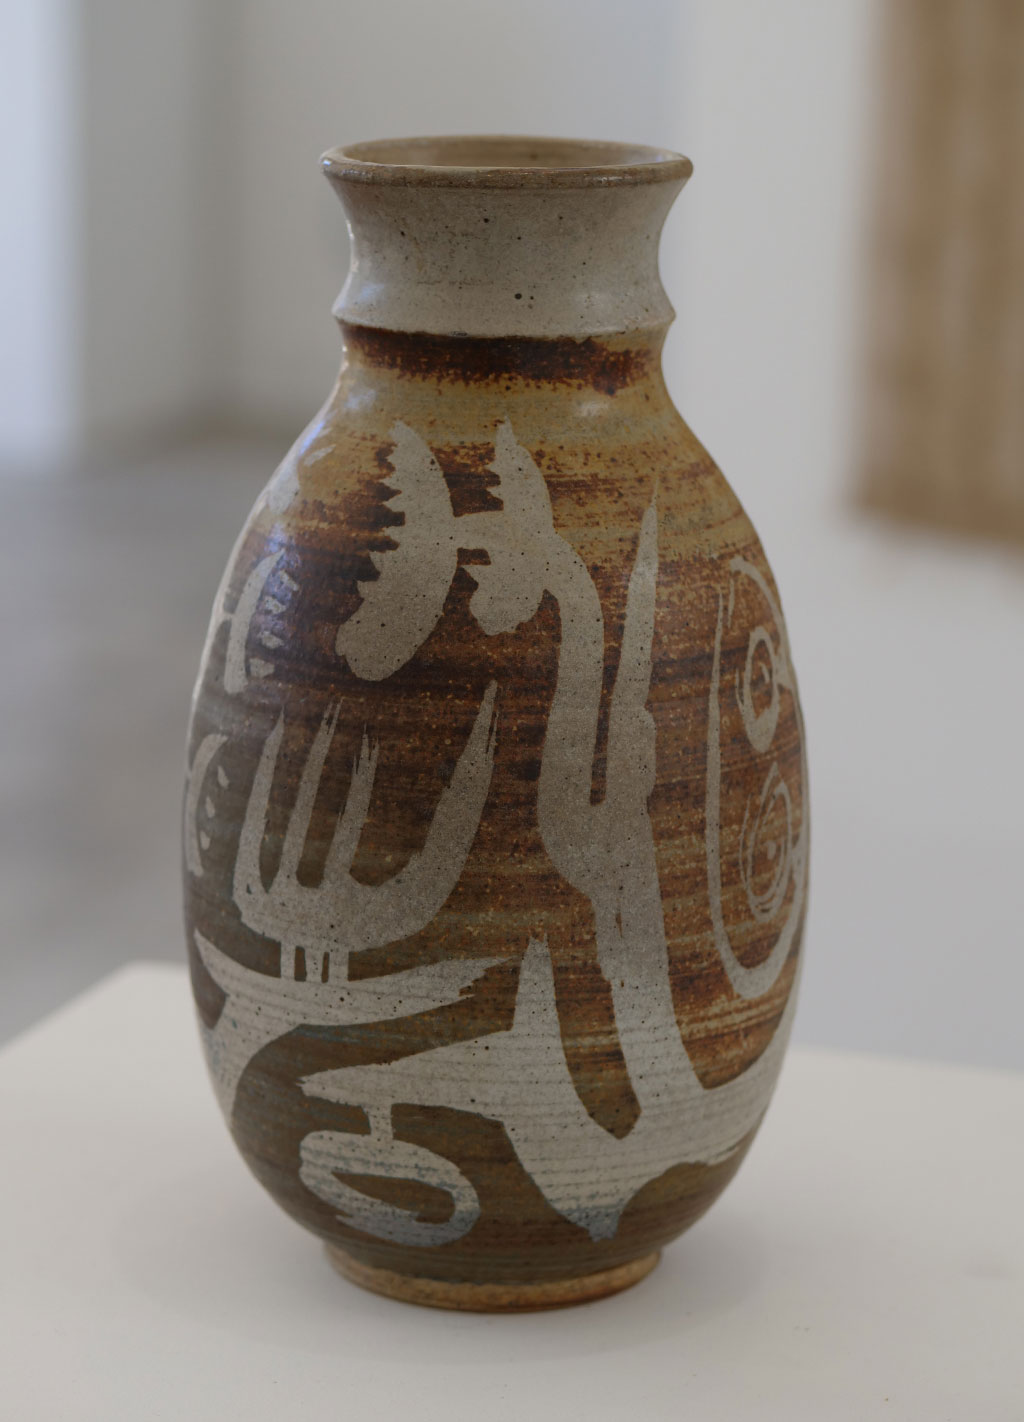 F. Carlton Ball, Vessel, Early 1960s. Glazed stoneware, California Visionaries: Seminal Studio Craft, Featuring Works from the Forrest L. Merrill Collection